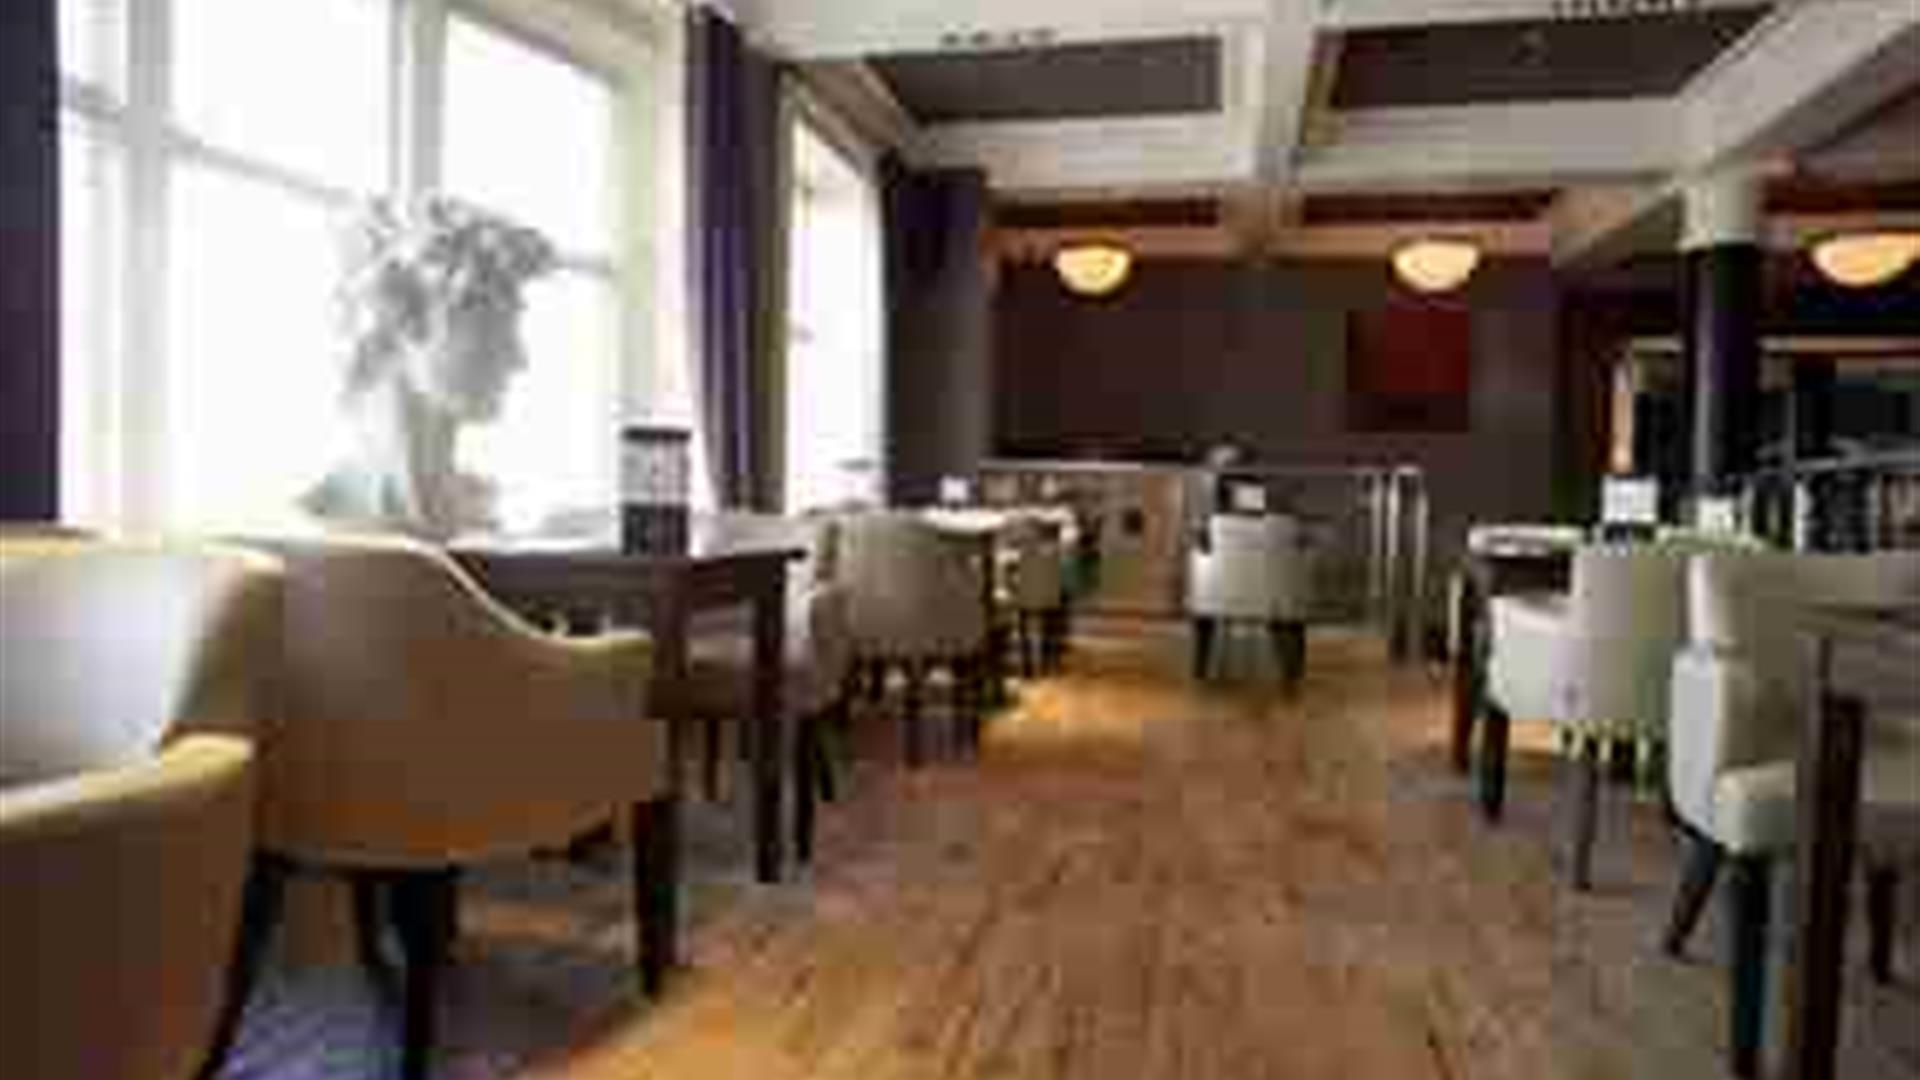 Inside view of The Bank Bar & Restaurant, Newry